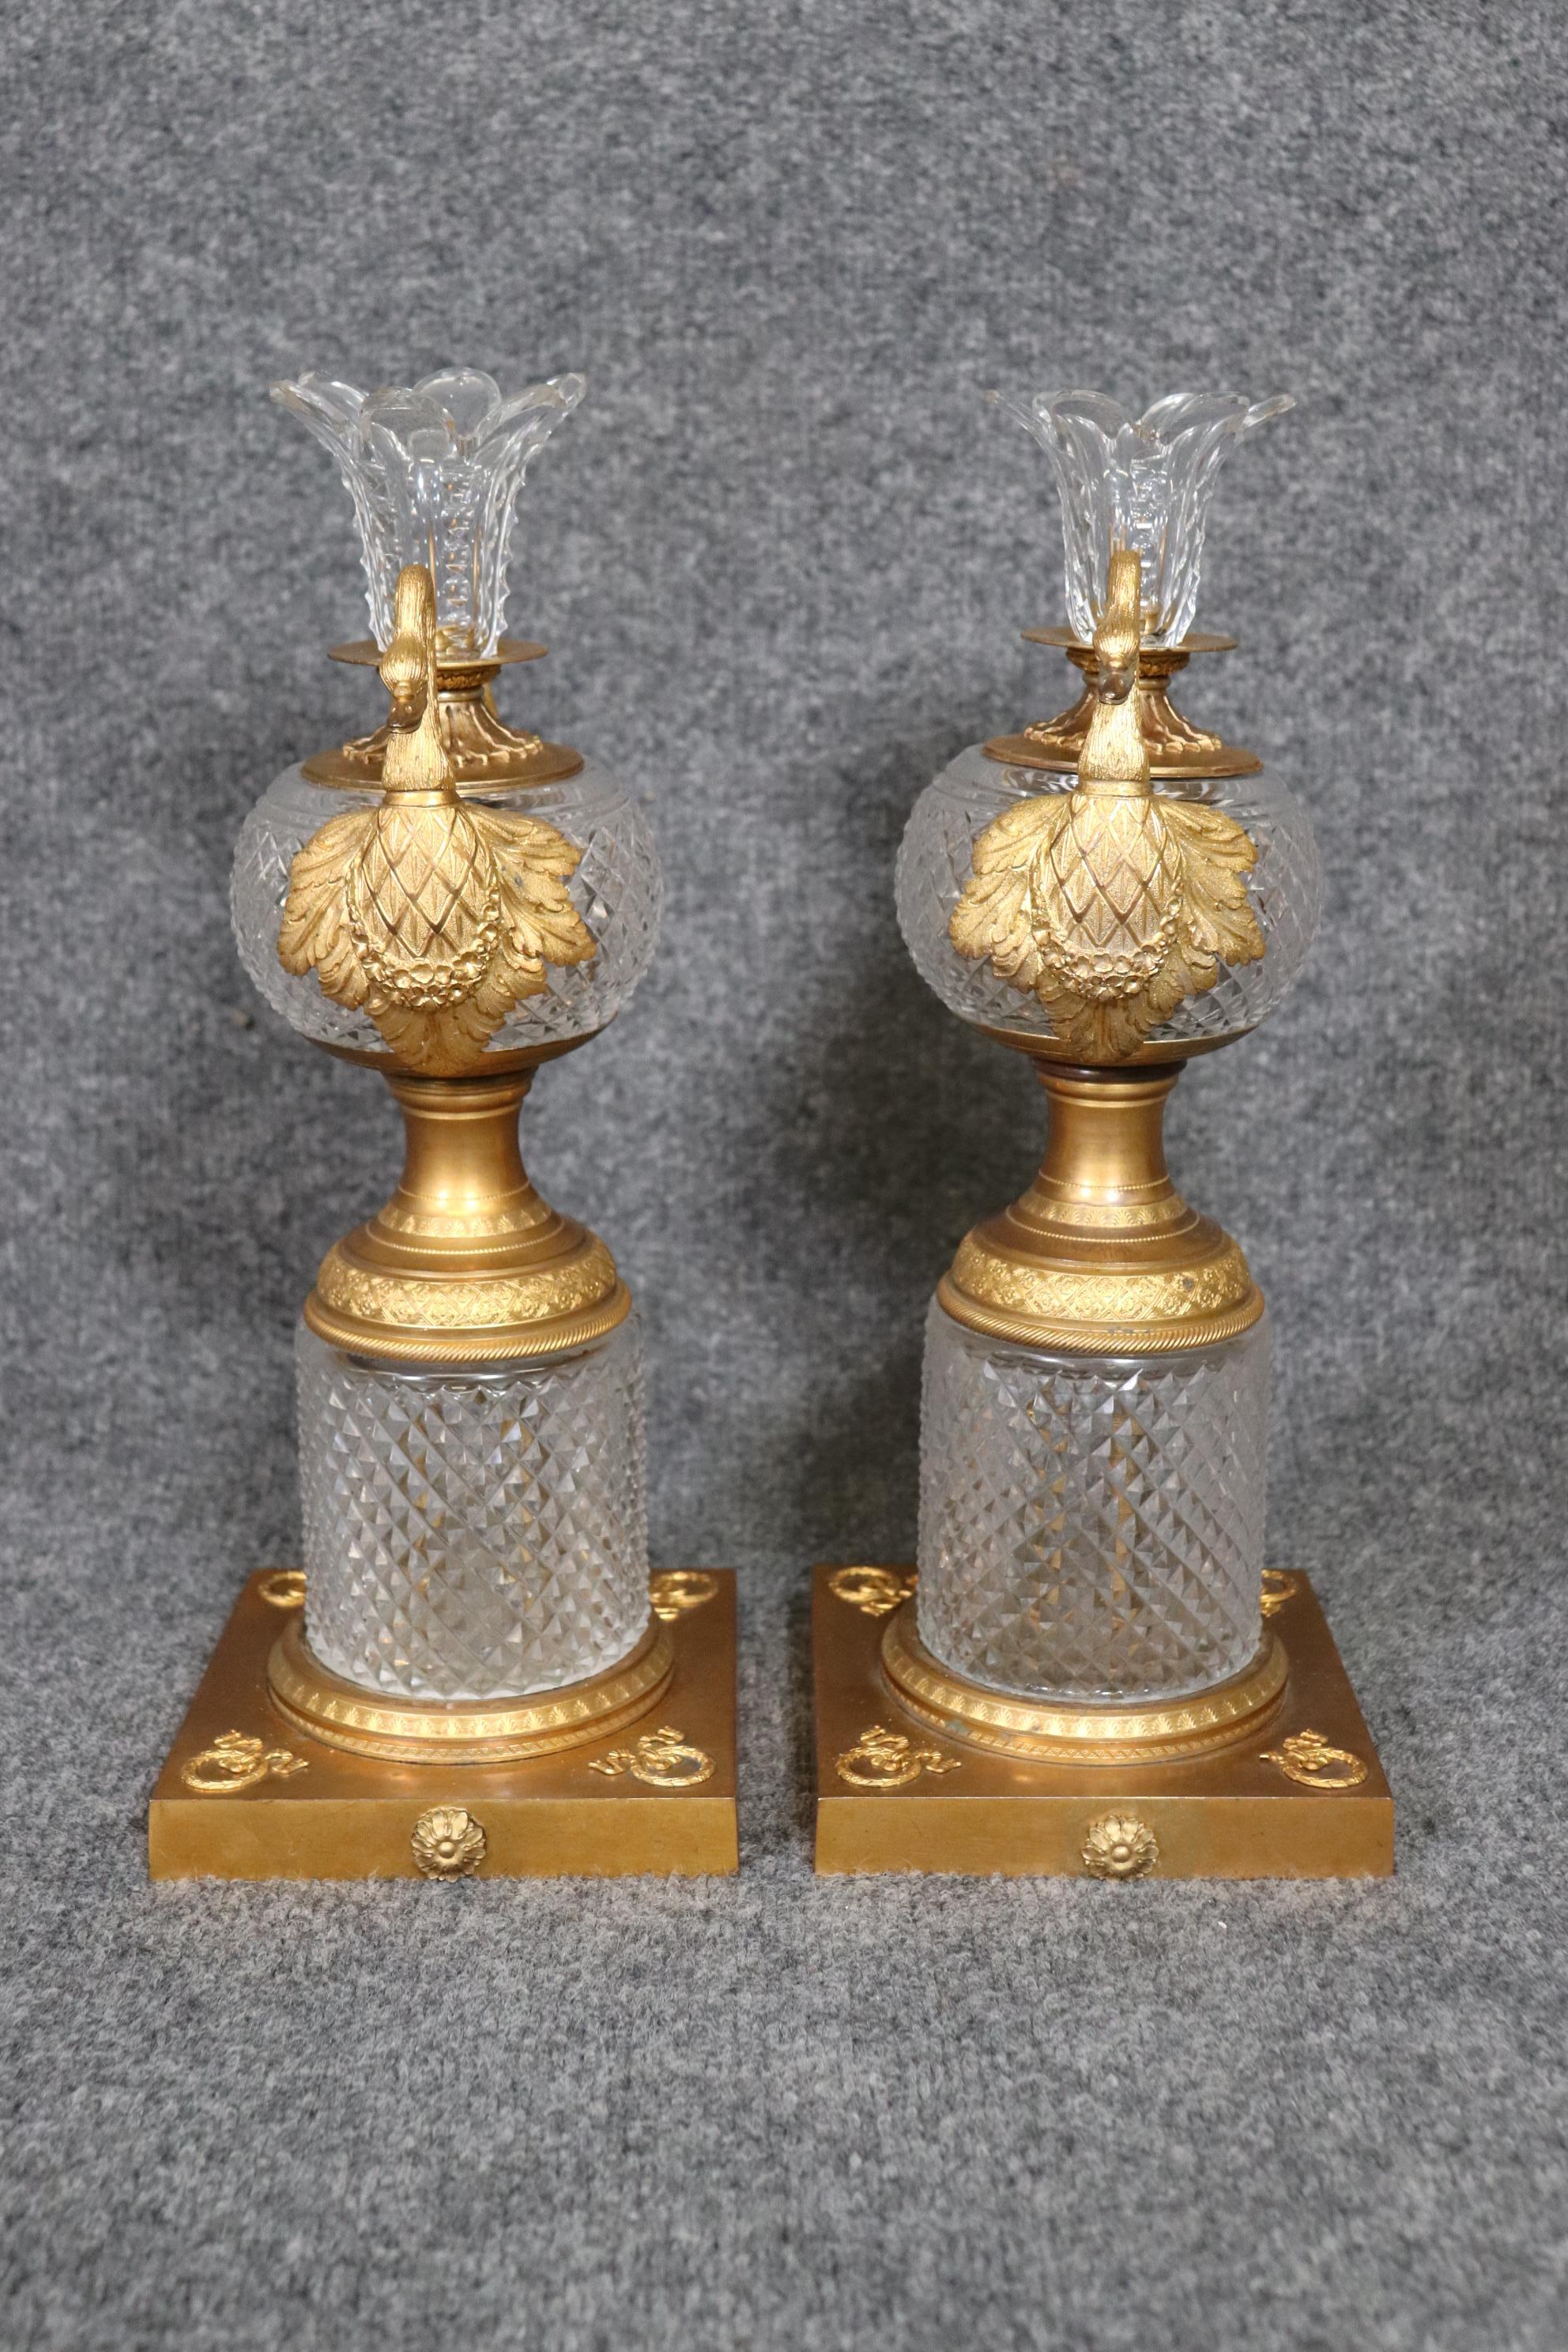 Exceptional Pair of Baccarat Quality Crystal Dore' Bronze Cassolettes with Swans 2